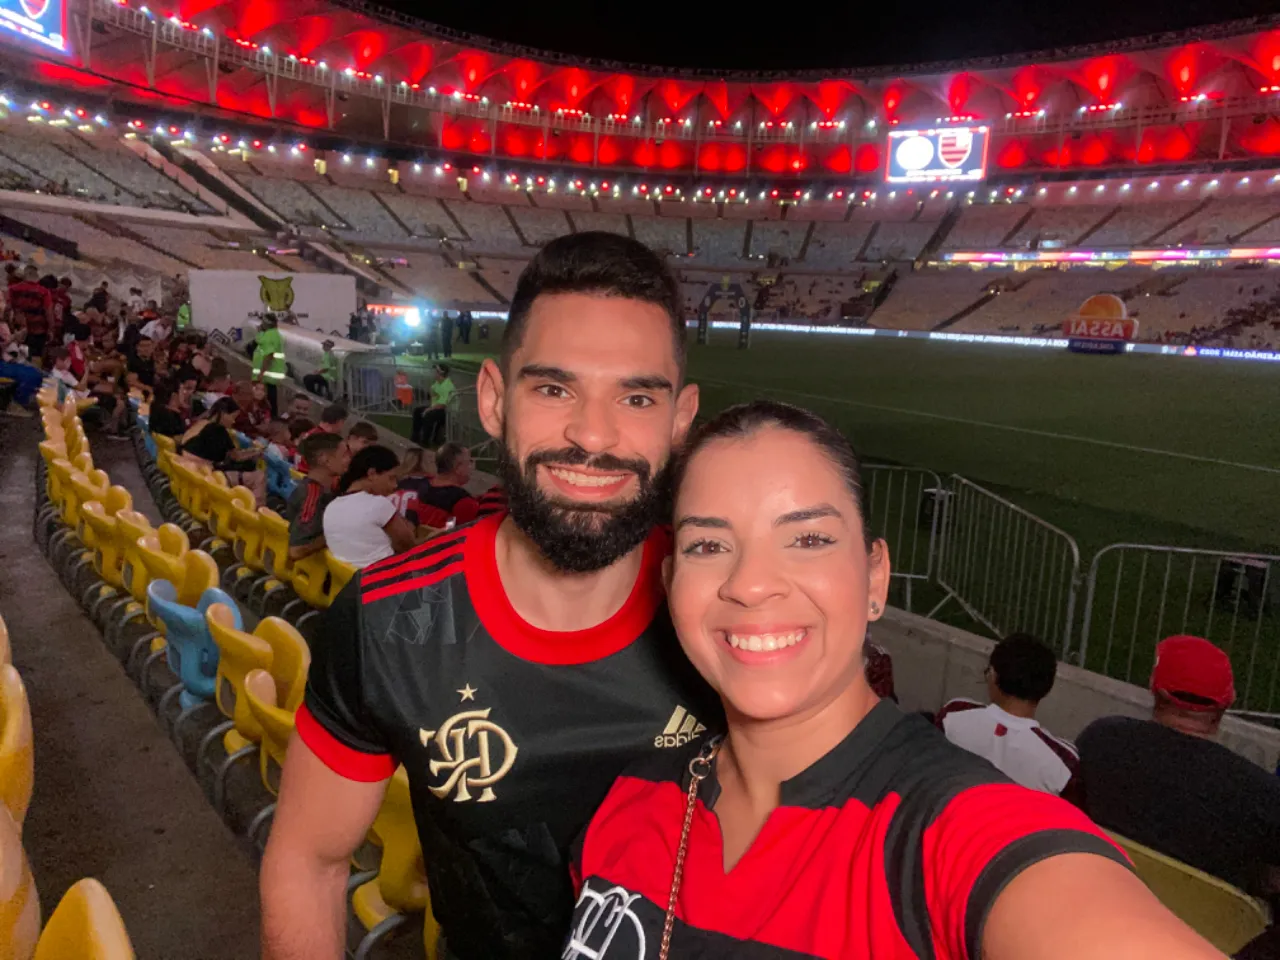 a man and woman taking a selfie at a soccer game